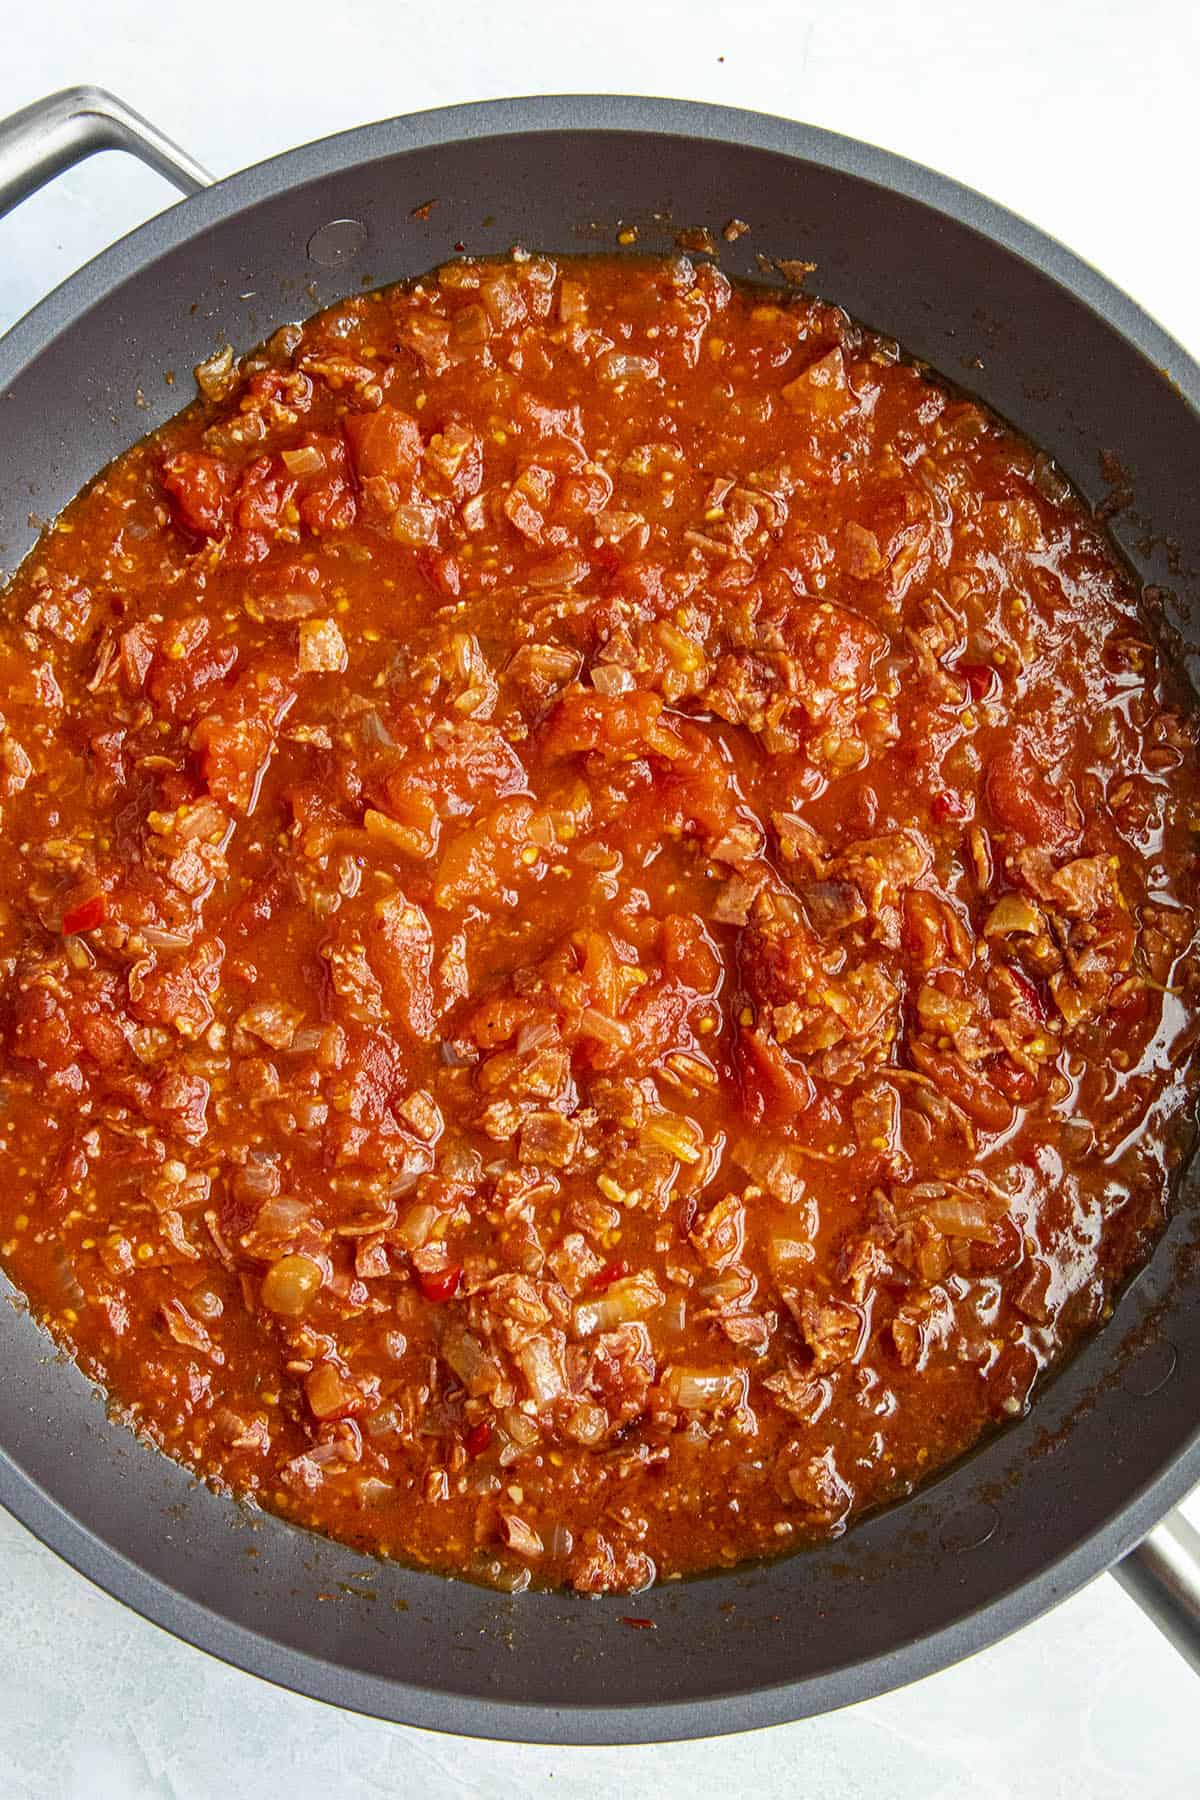 Simmering Amatriciana sauce in a pan